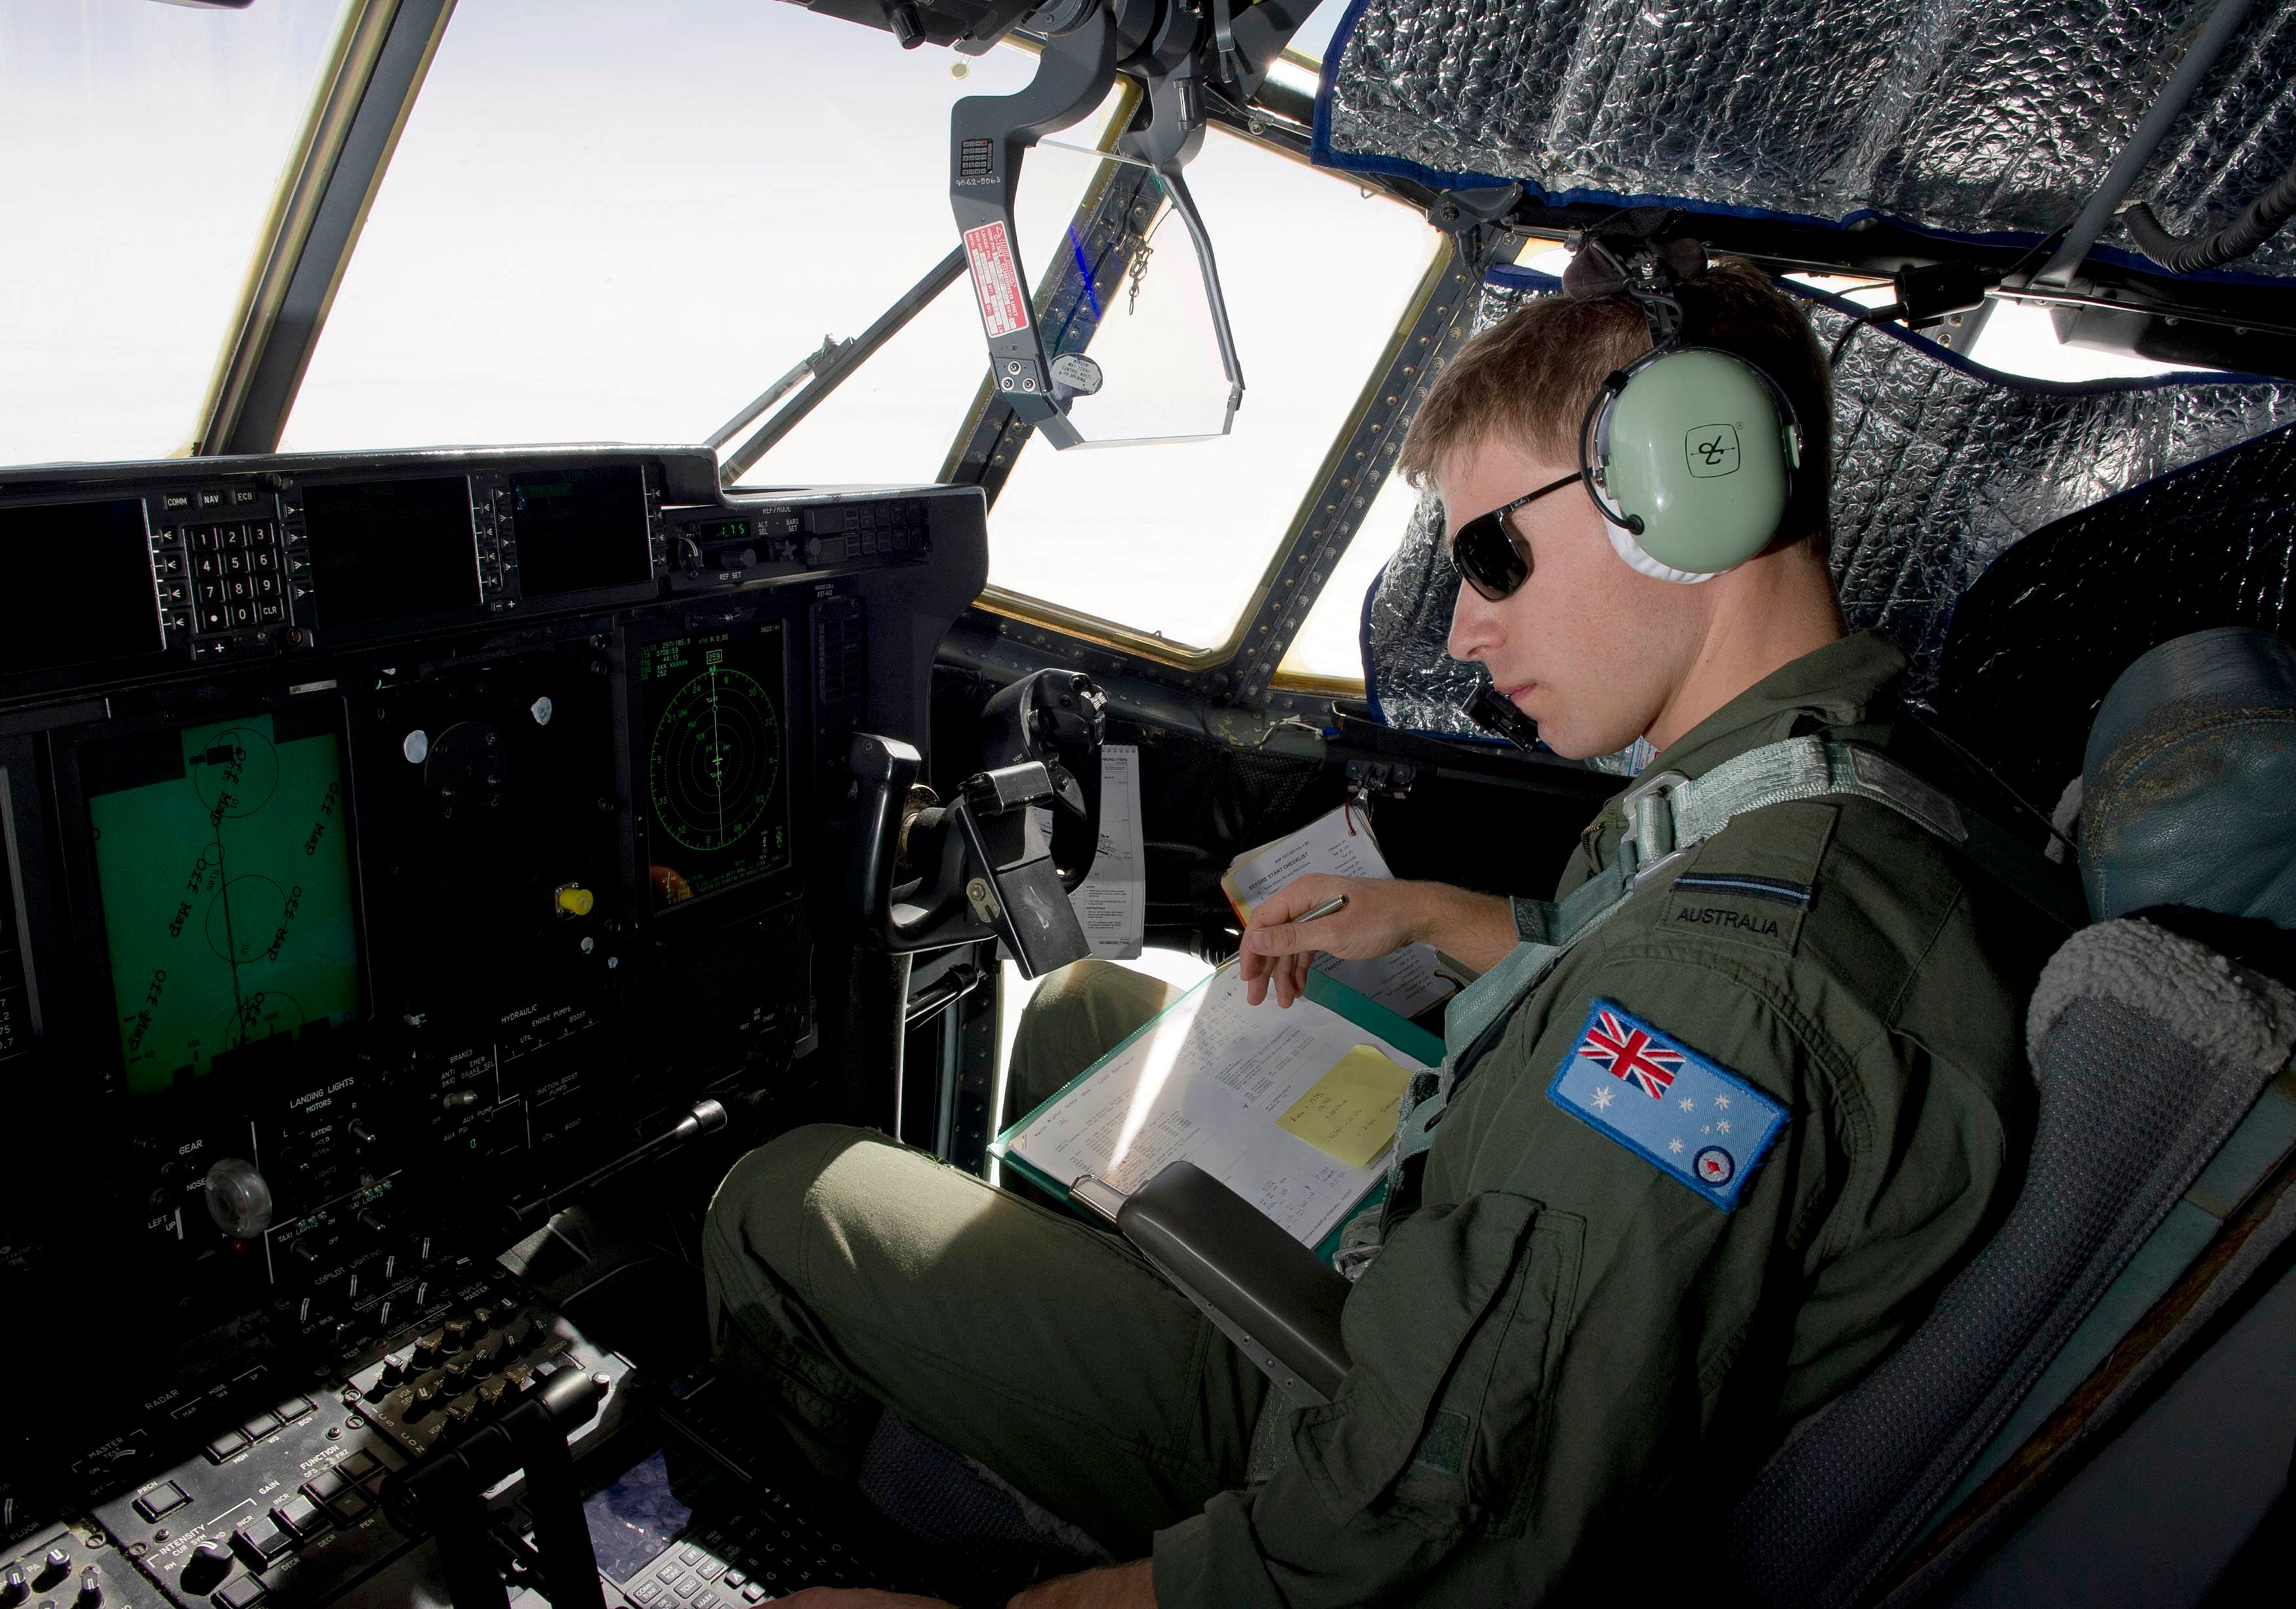 Royal Australian Air Force (RAAF) Pilot Flying Officer Sam Dudman monitors the systems of a RAAF C-130J Hercules aircraft as it prepares to launch two Self Locating Data Marker Buoys in the southern Indian Ocean during the search for missing Malaysian Airlines flight MH370 in this picture released by the Australian Defence Force March 21, 2014. An international search force resumed the hunt for missing Malaysia Airlines flight MH370 in the remote southern Indian Ocean on Friday as authorities pored over satellite data to try and confirm a potential debris field. Photo: Reuters